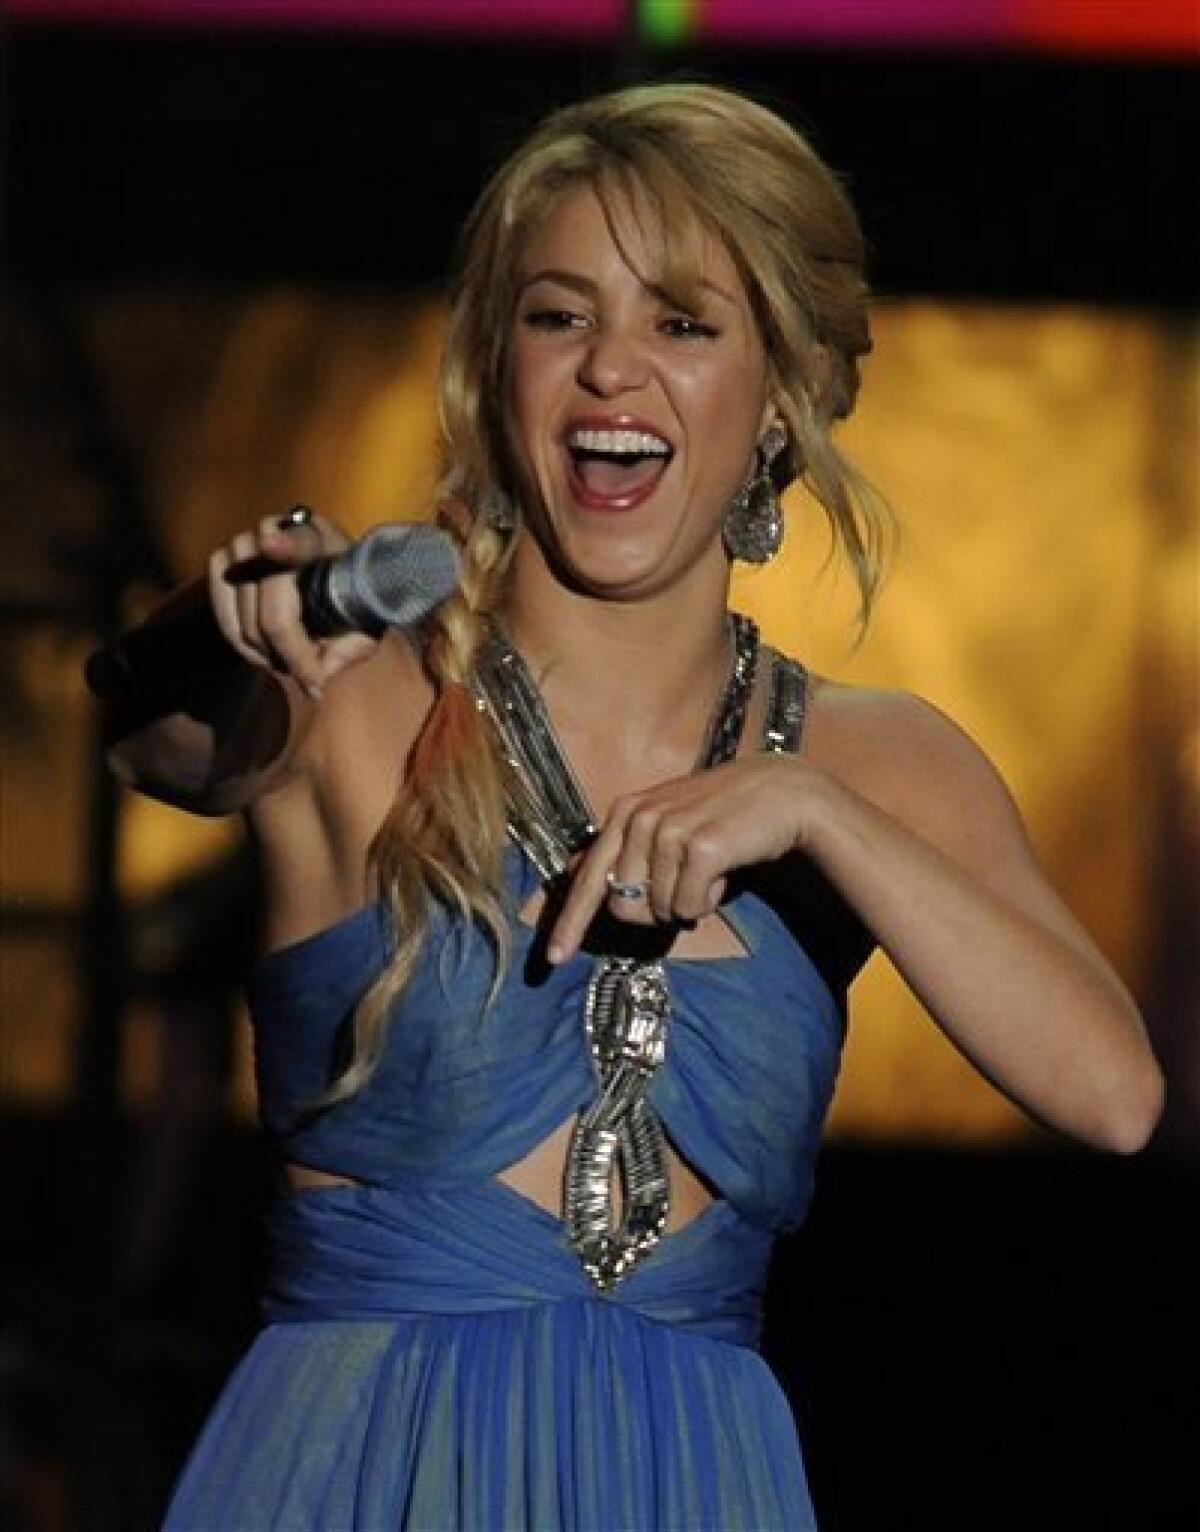 Shakira performs at the Latin Recording Academy Person of the Year tribute in her honor on Wednesday Nov. 9, 2011 in Las Vegas. (AP Photo/Chris Pizzello)